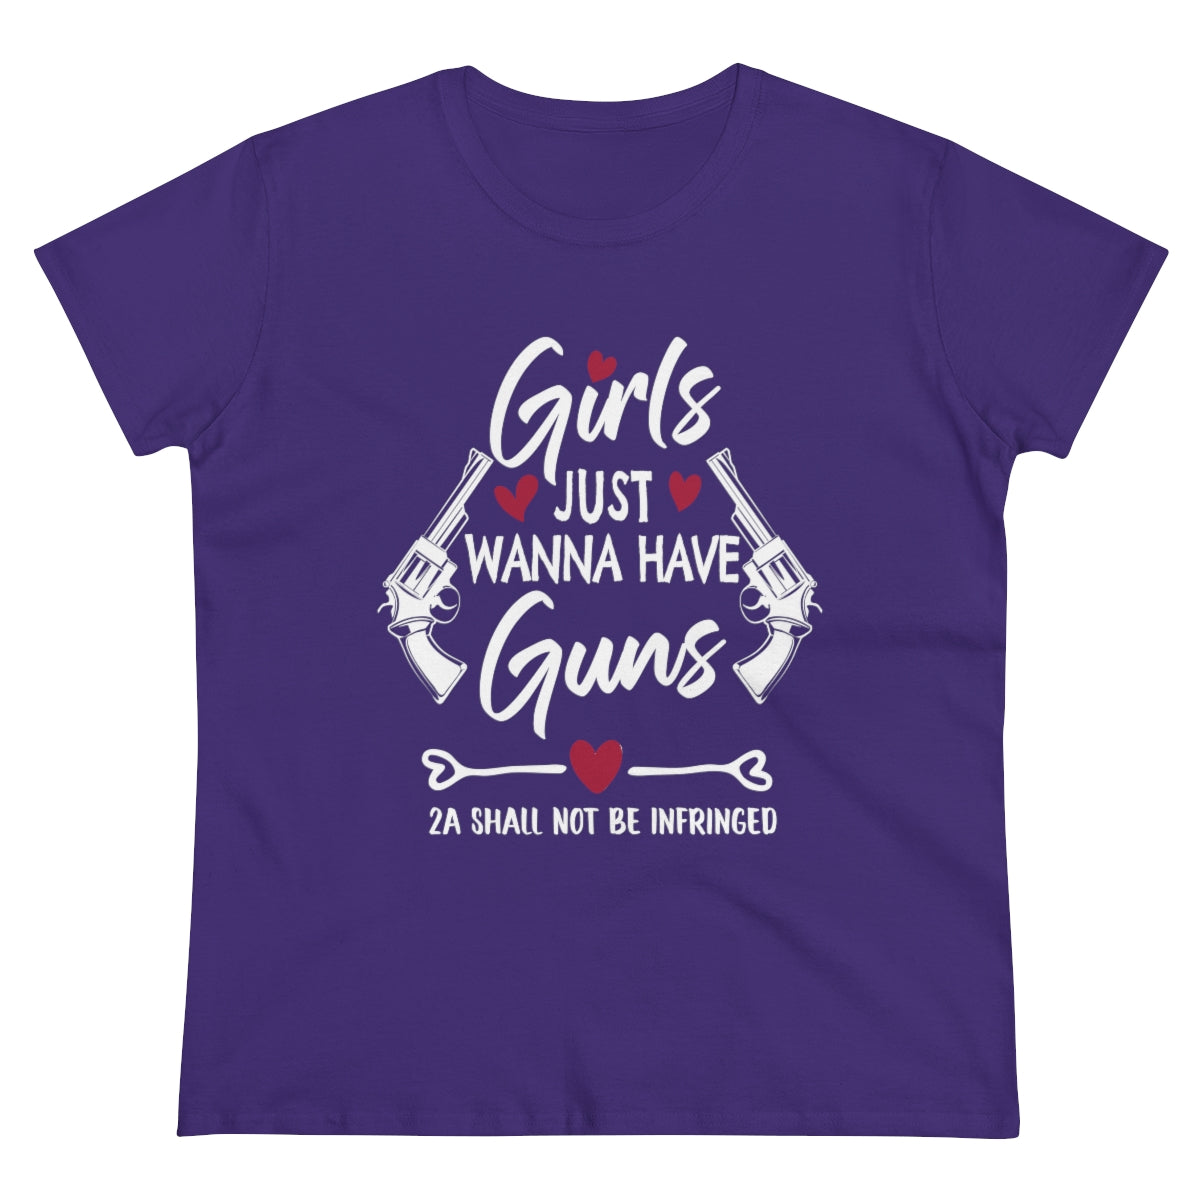 Girls Just Wanna Have Guns | Women's Tee - Rise of The New Media